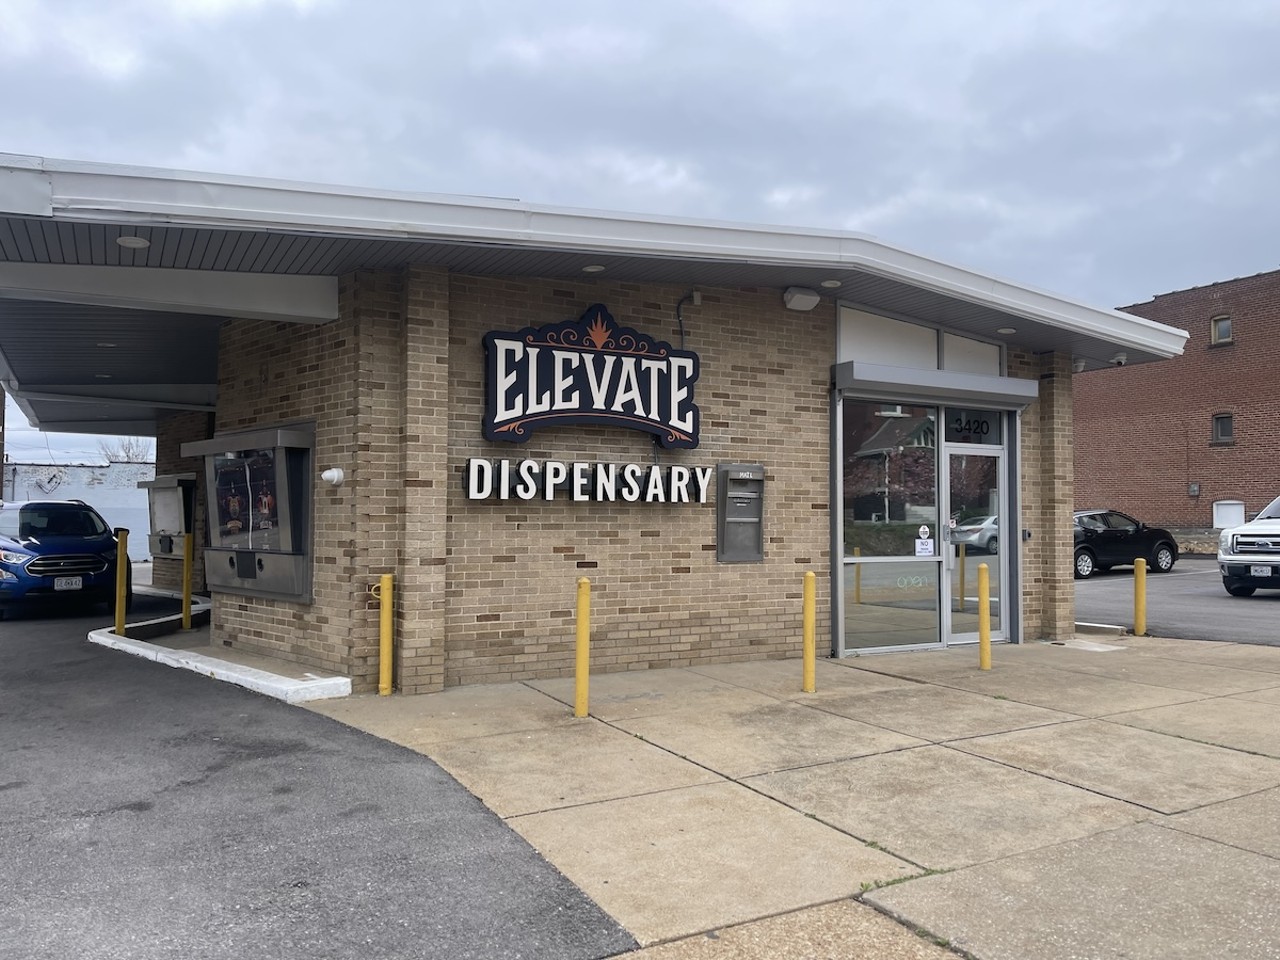 For Those Who Are &#10;New to Cannabis
Elevate Cannabis Dispensary, 3420 Iowa Avenue
Elevate Cannabis Dispensary is for the newbies: If you're unsure of where to start, they'll help you elevate your knowledge and dive right in. Elevate prides themselves on welcoming first-timers, and even have a section on their website called "New to Cannabis," which offers everything a new toker could need from how to inhale to what to expect when walking into a dispensary. Unsure where to start? Ask a budtender or try their brand's house flower, which tends to be their bestseller. Elevate Cannabis Dispensary is open for business Monday through Sunday from 9 a.m. to 9 p.m. To learn more, visit elevatecannabis.com.